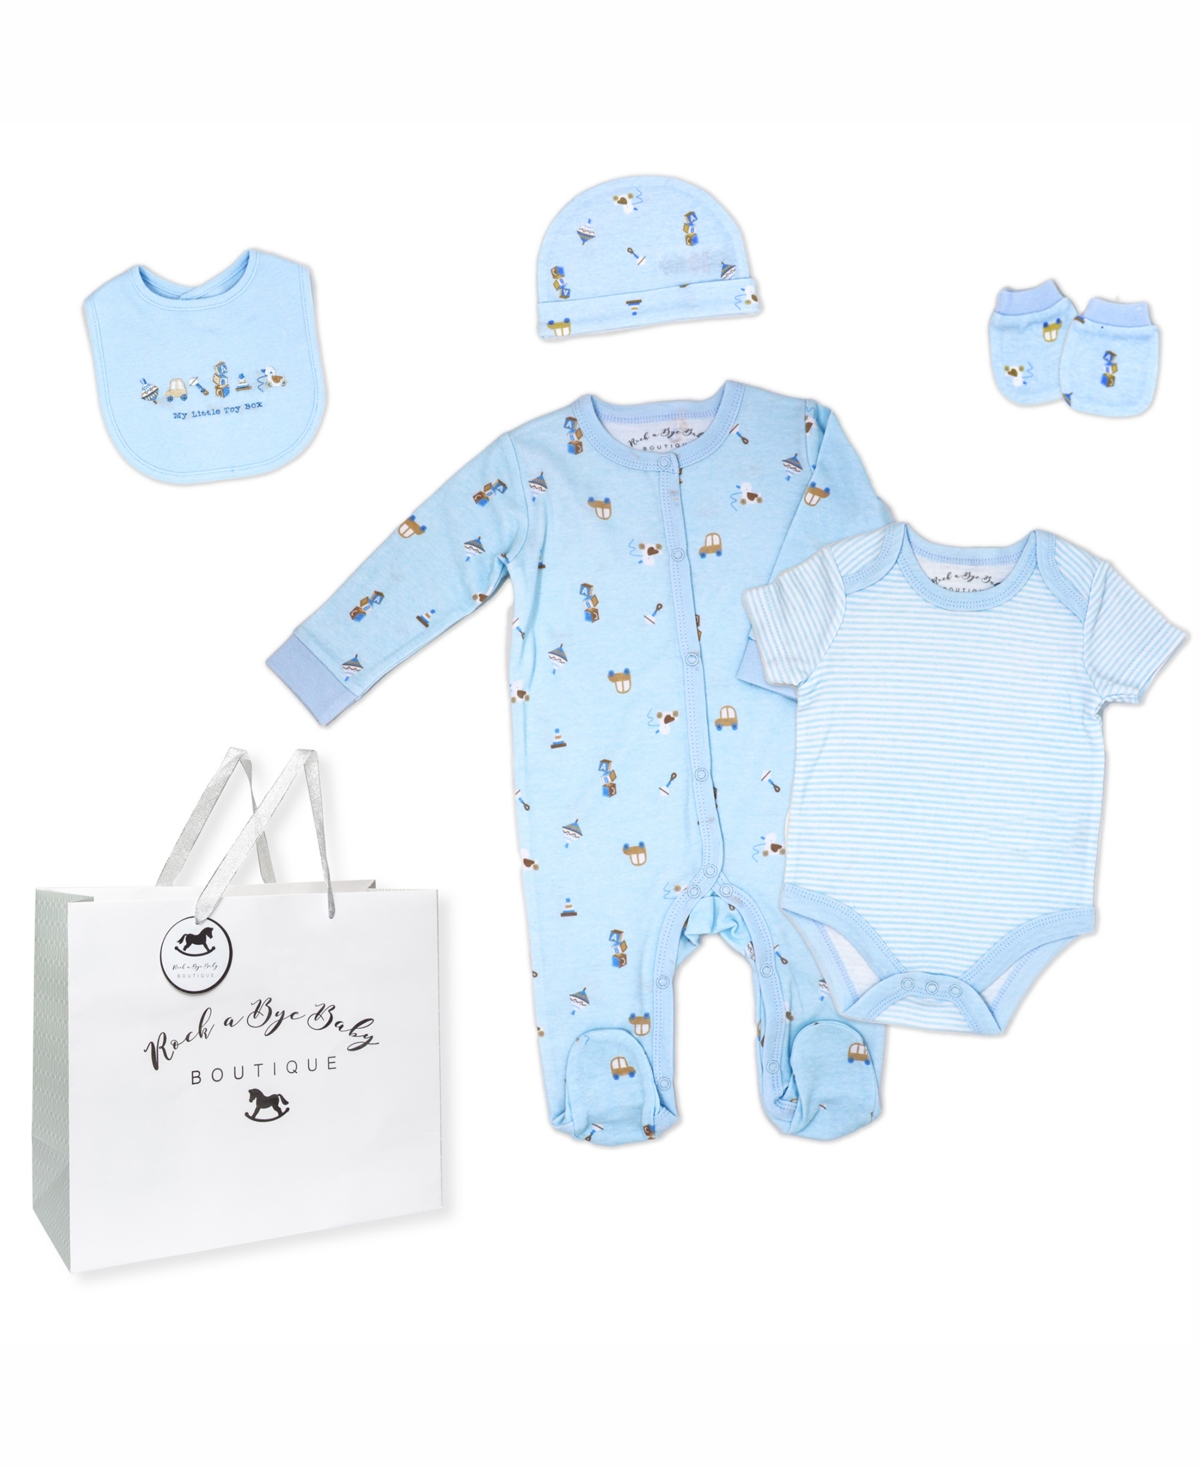 Rock-a-bye Baby Boutique Baby Boys Layette Gift Bag Set In Toy Box